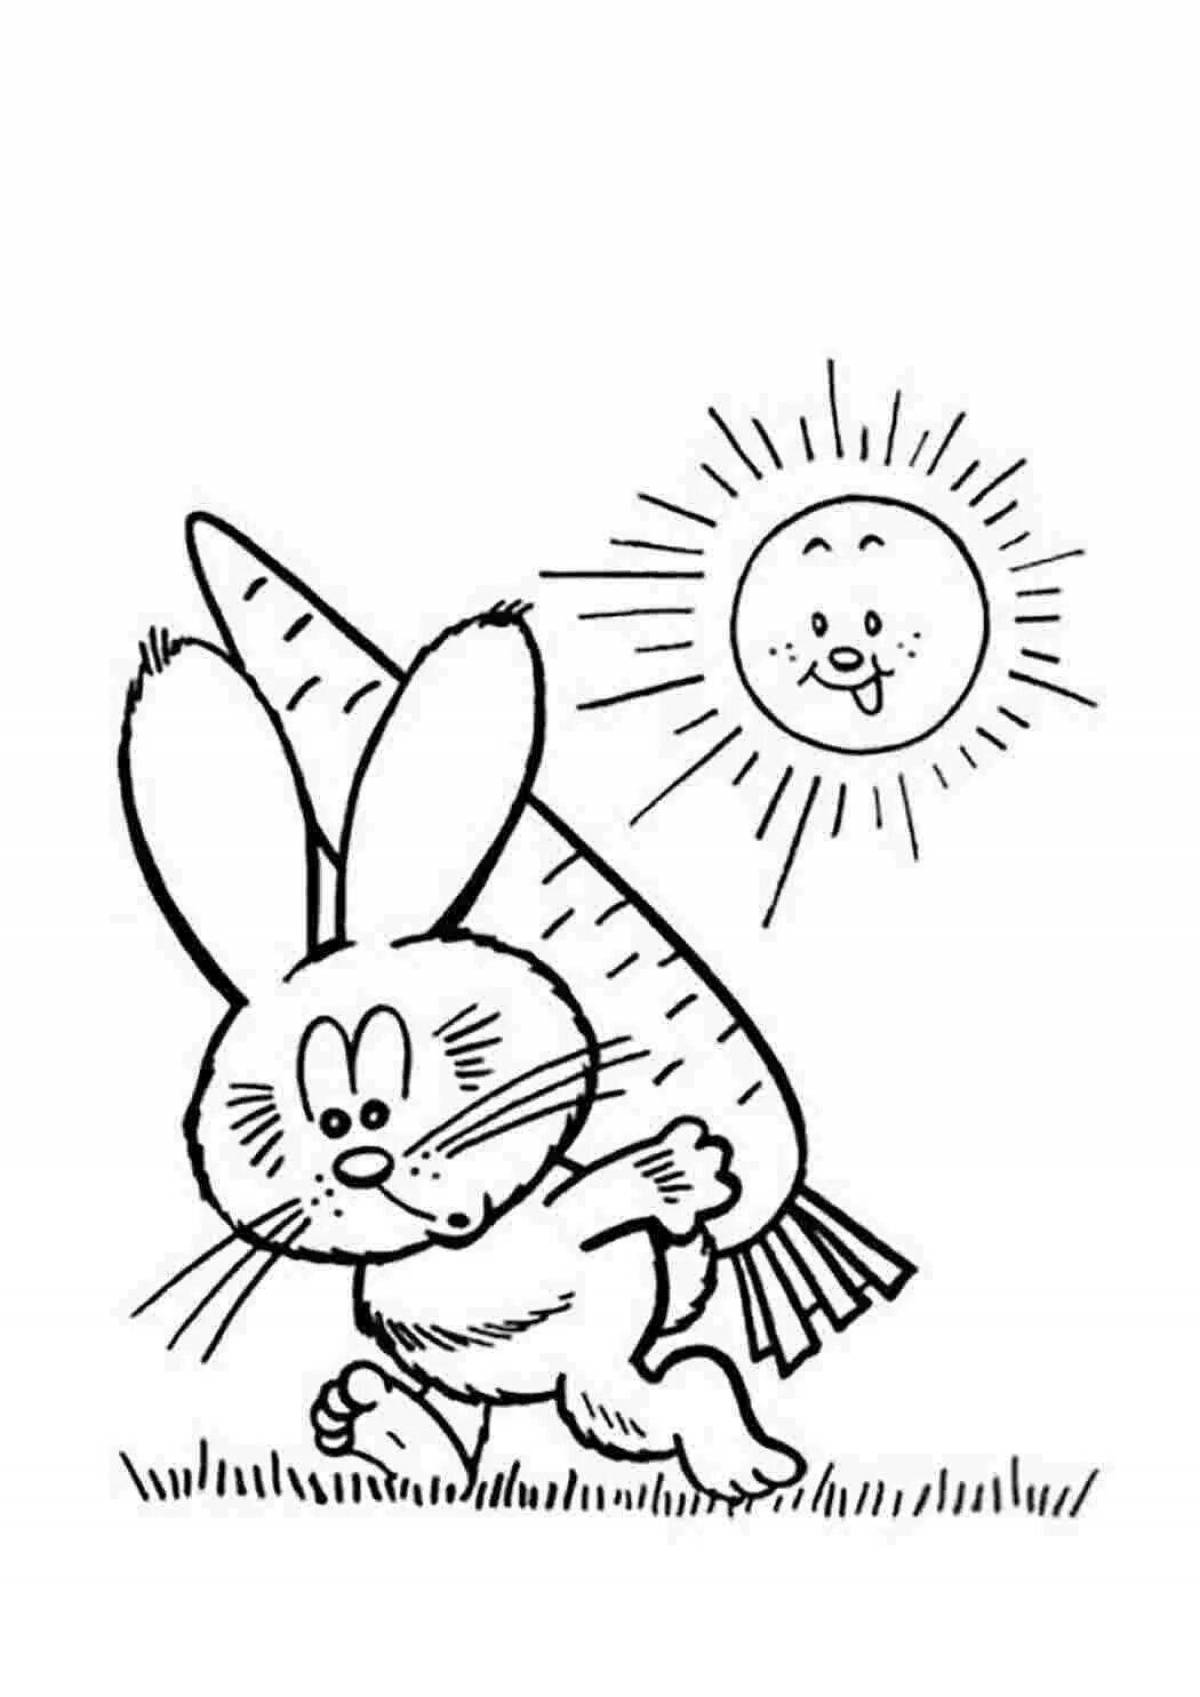 Funny rabbit and cat coloring book